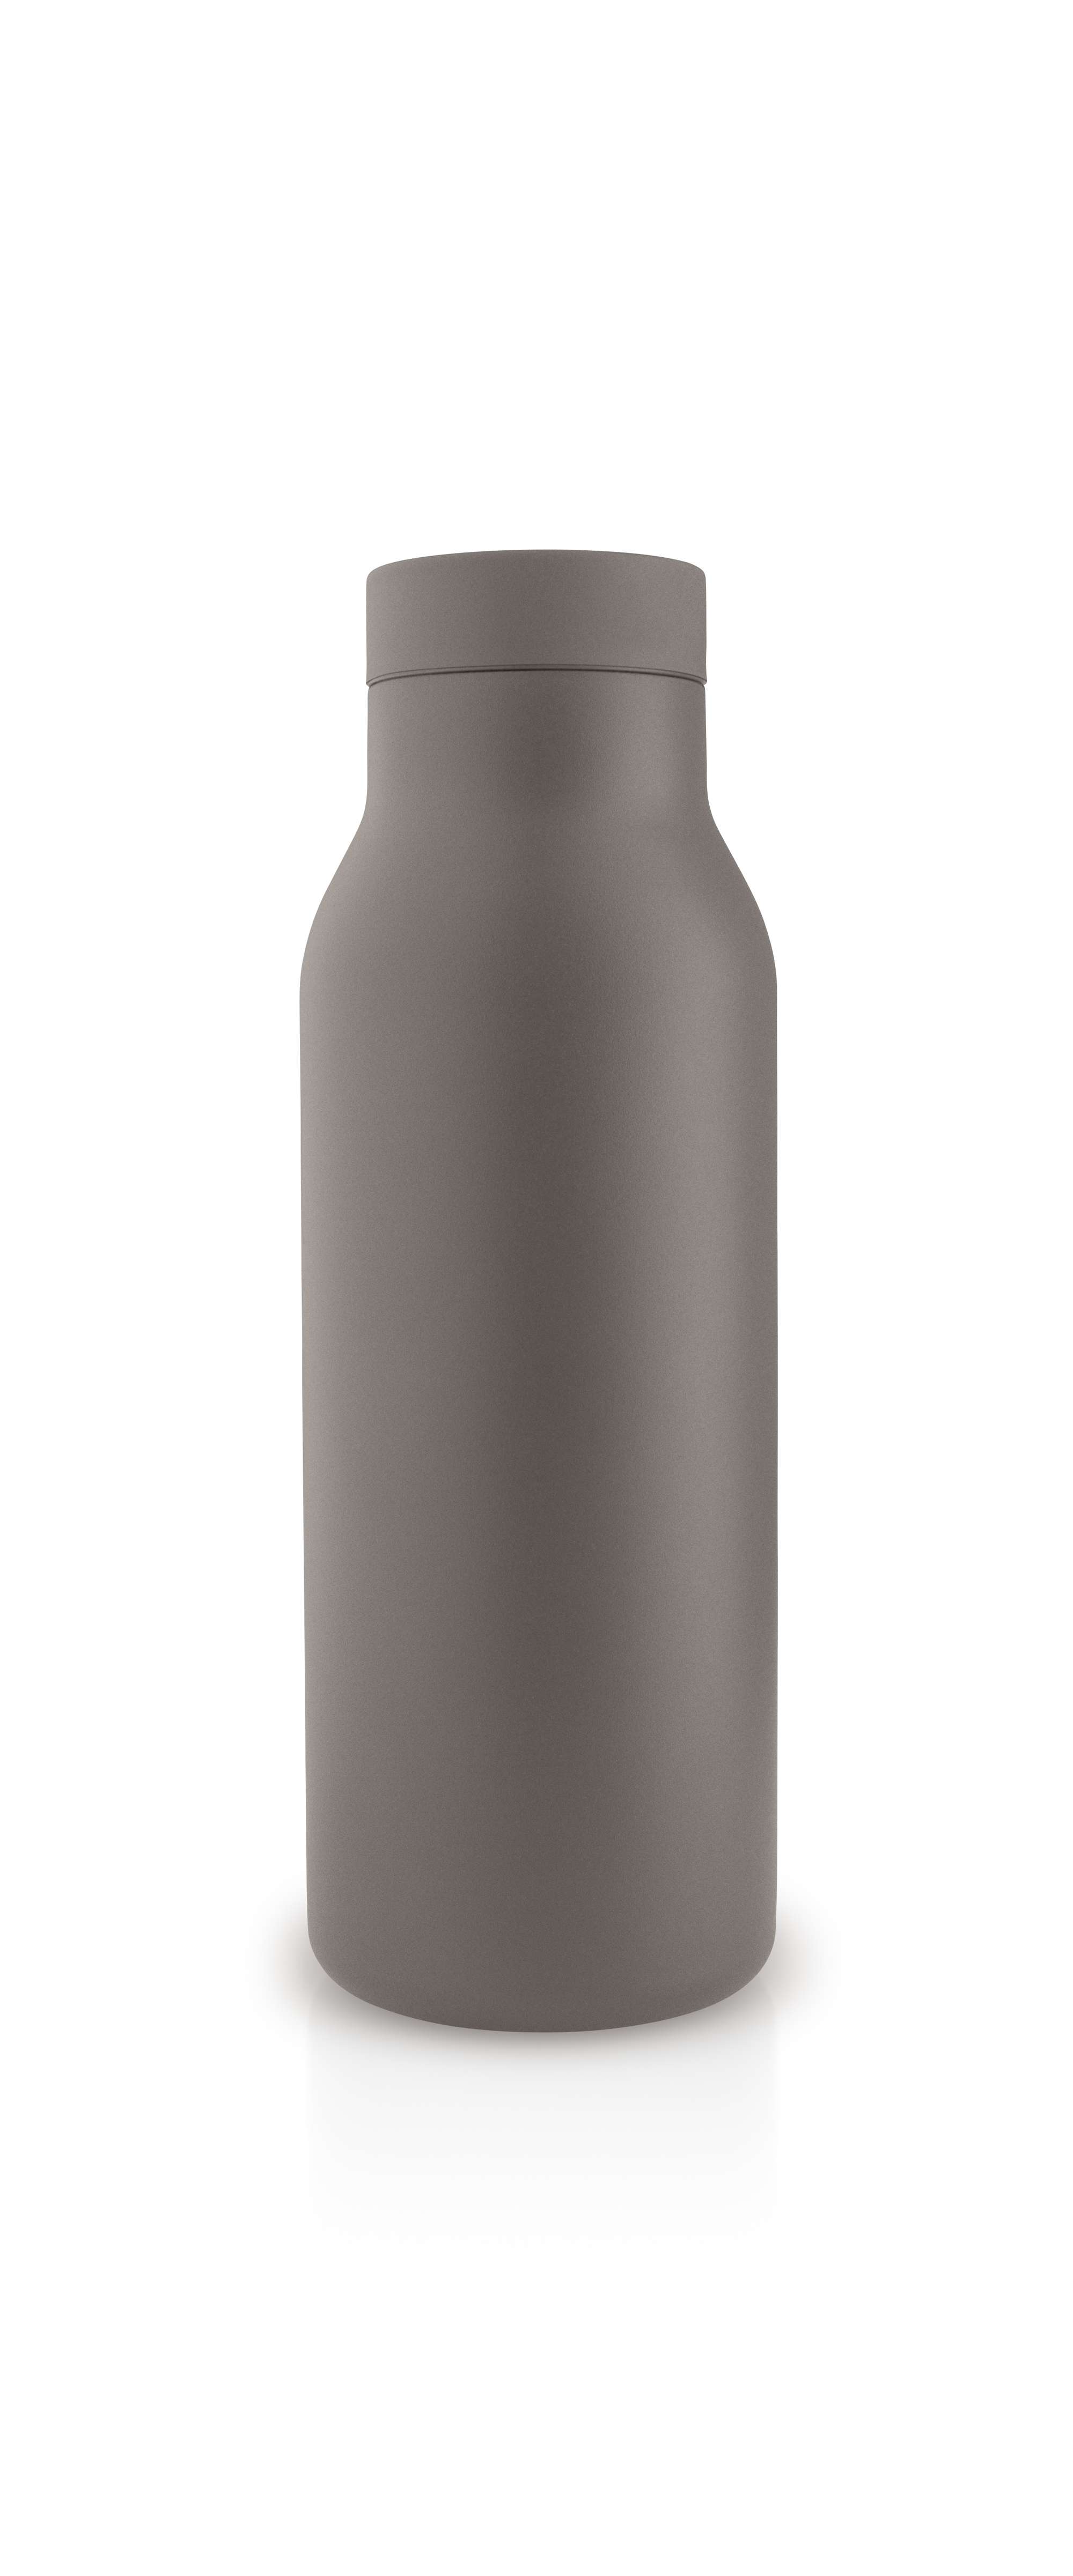 Urban thermo flask - 0.5 liters - Taupe